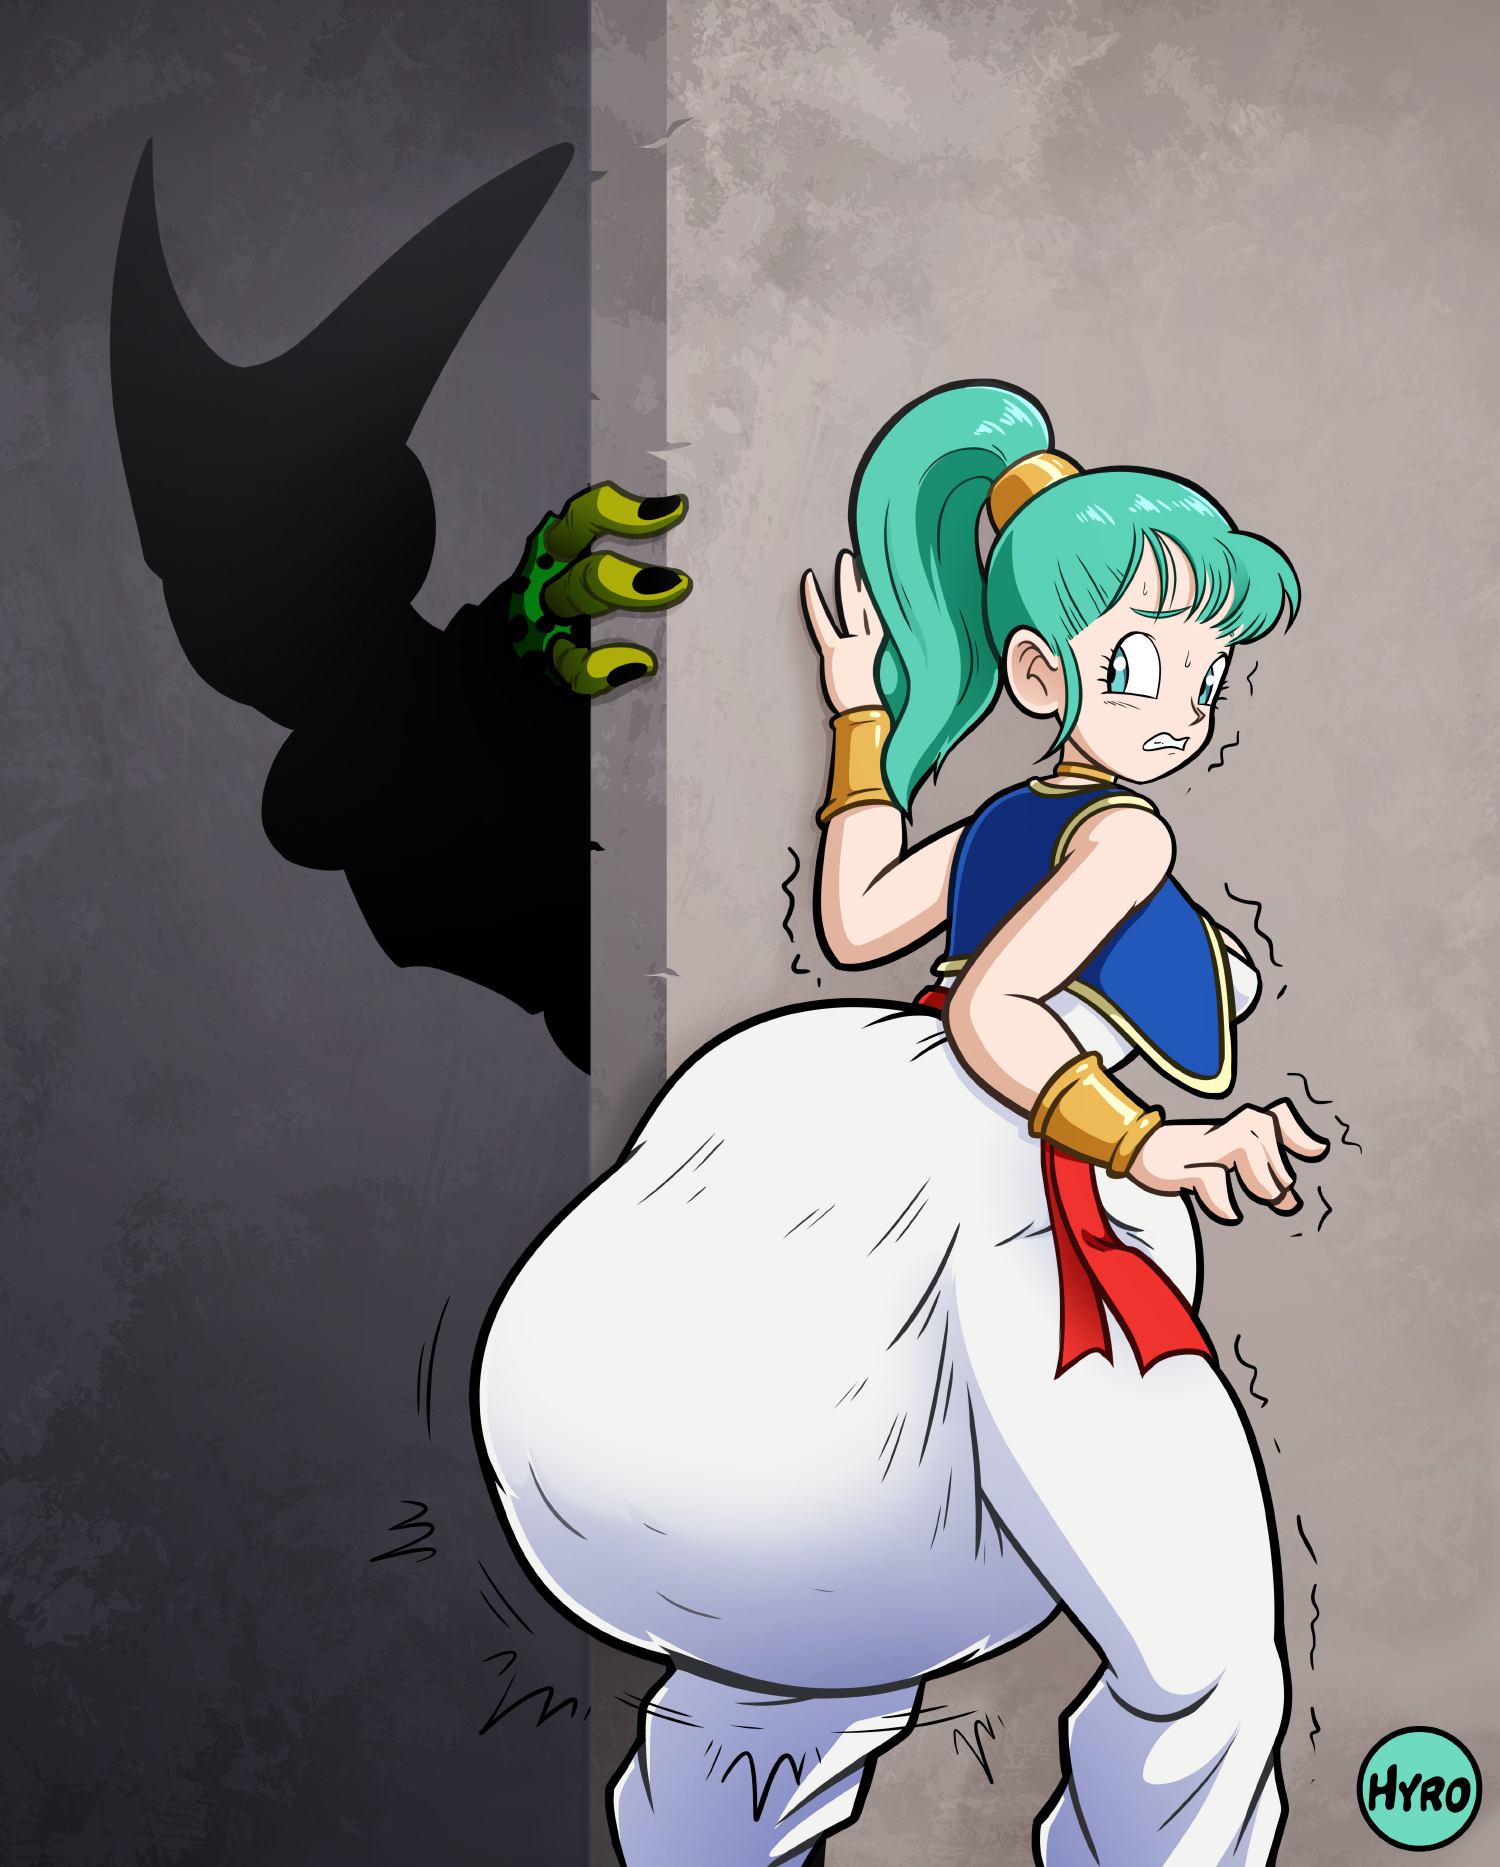 Fortunately for Bulma, Imperfect Cell doesn't have a nose... but I thi...